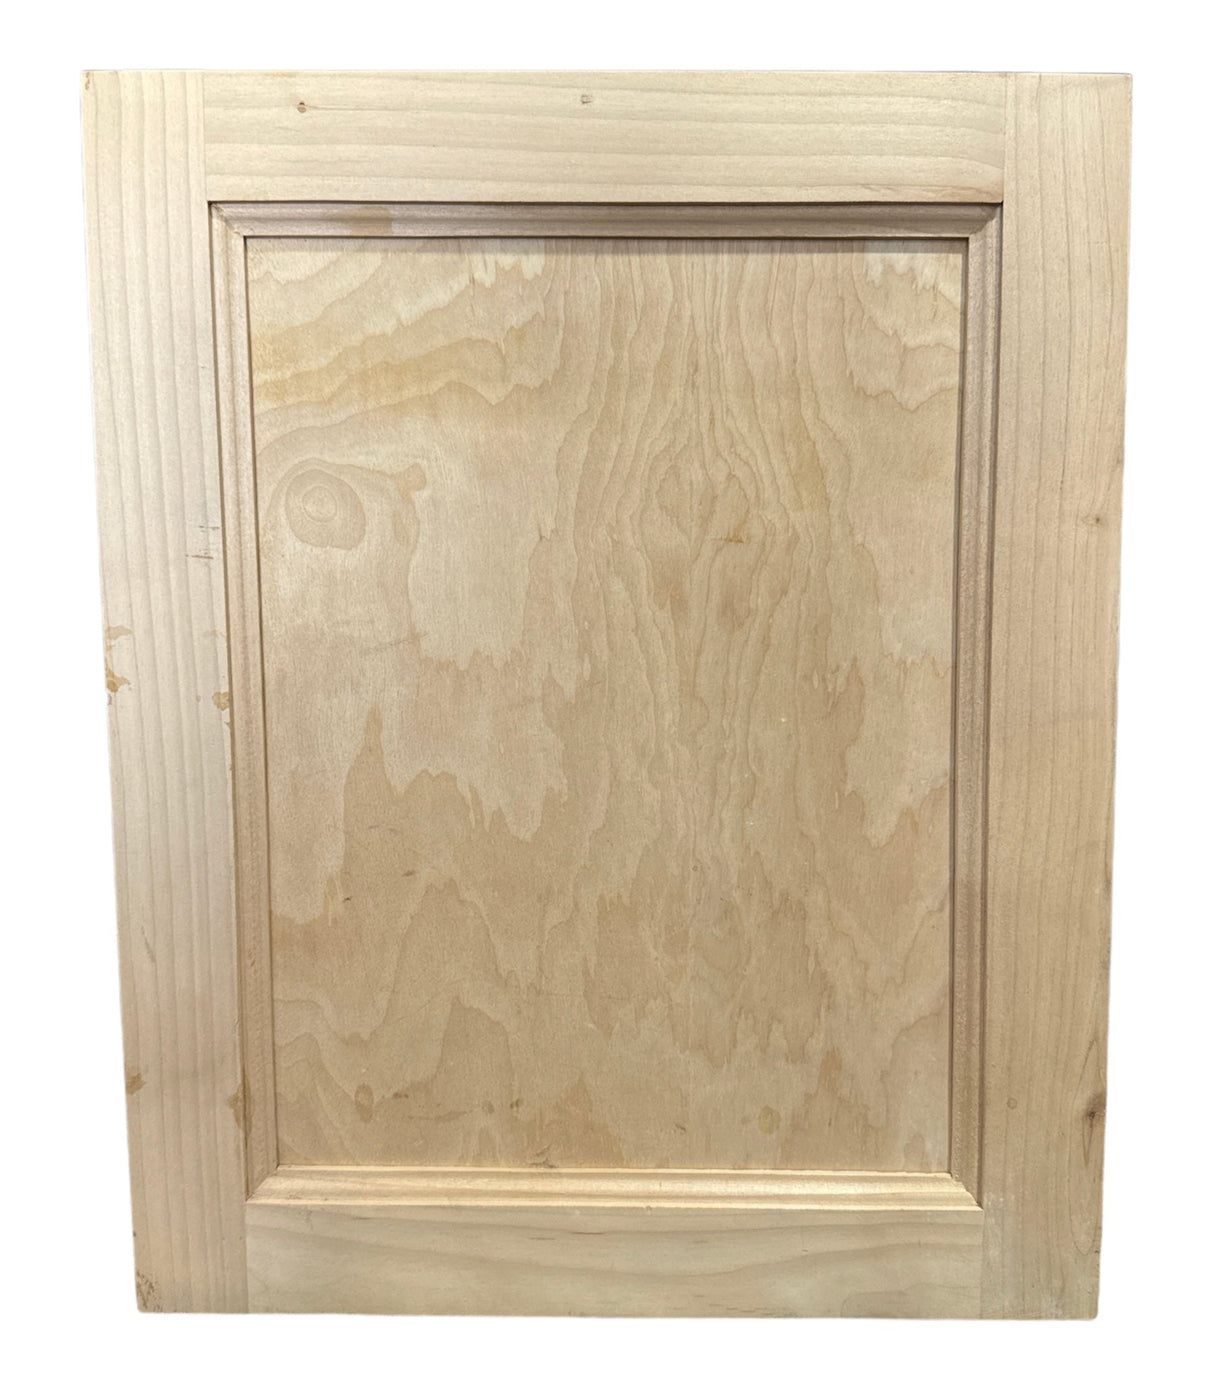 SABER SELECT 25.75 in. x 16.25 in. Unfinished Solid Wood Cabinet Door